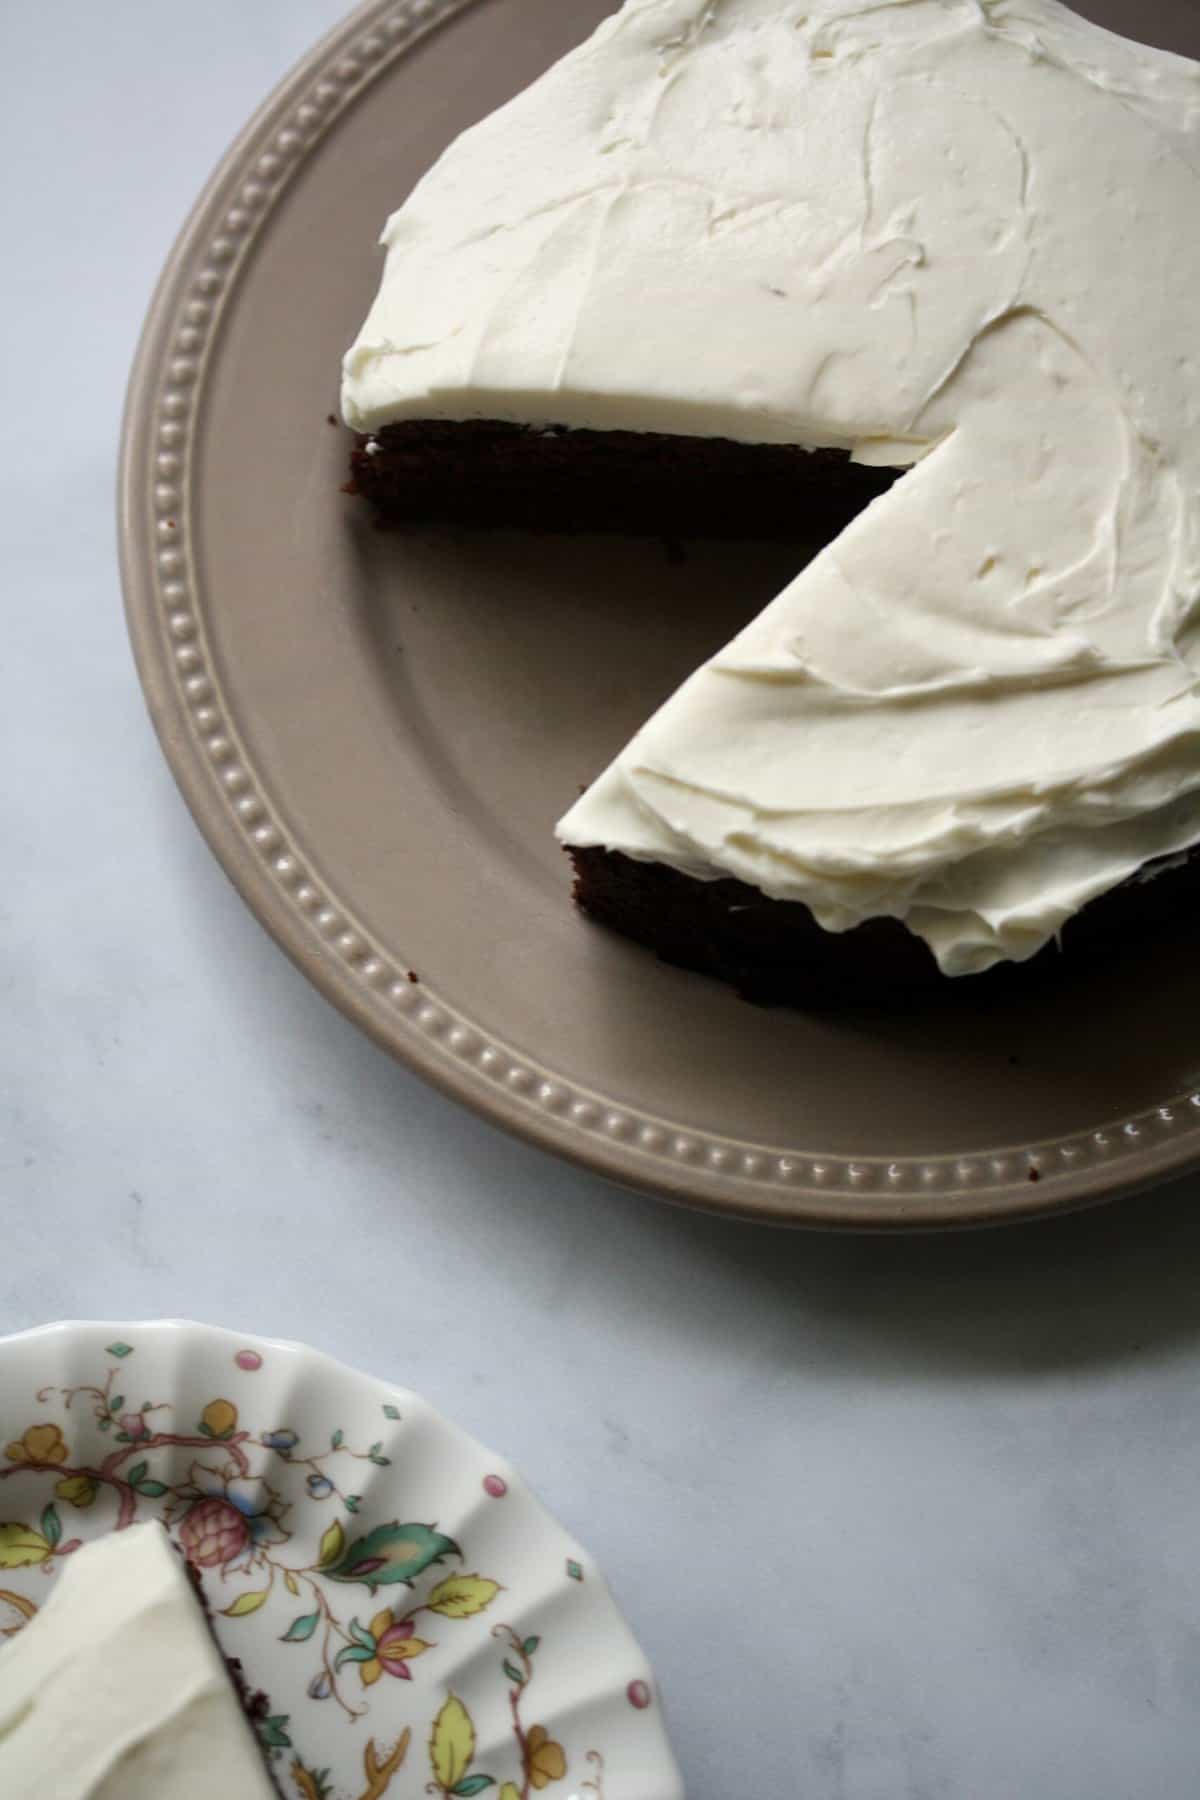 Gluten-free stout cake topped with cream cheese frosting.